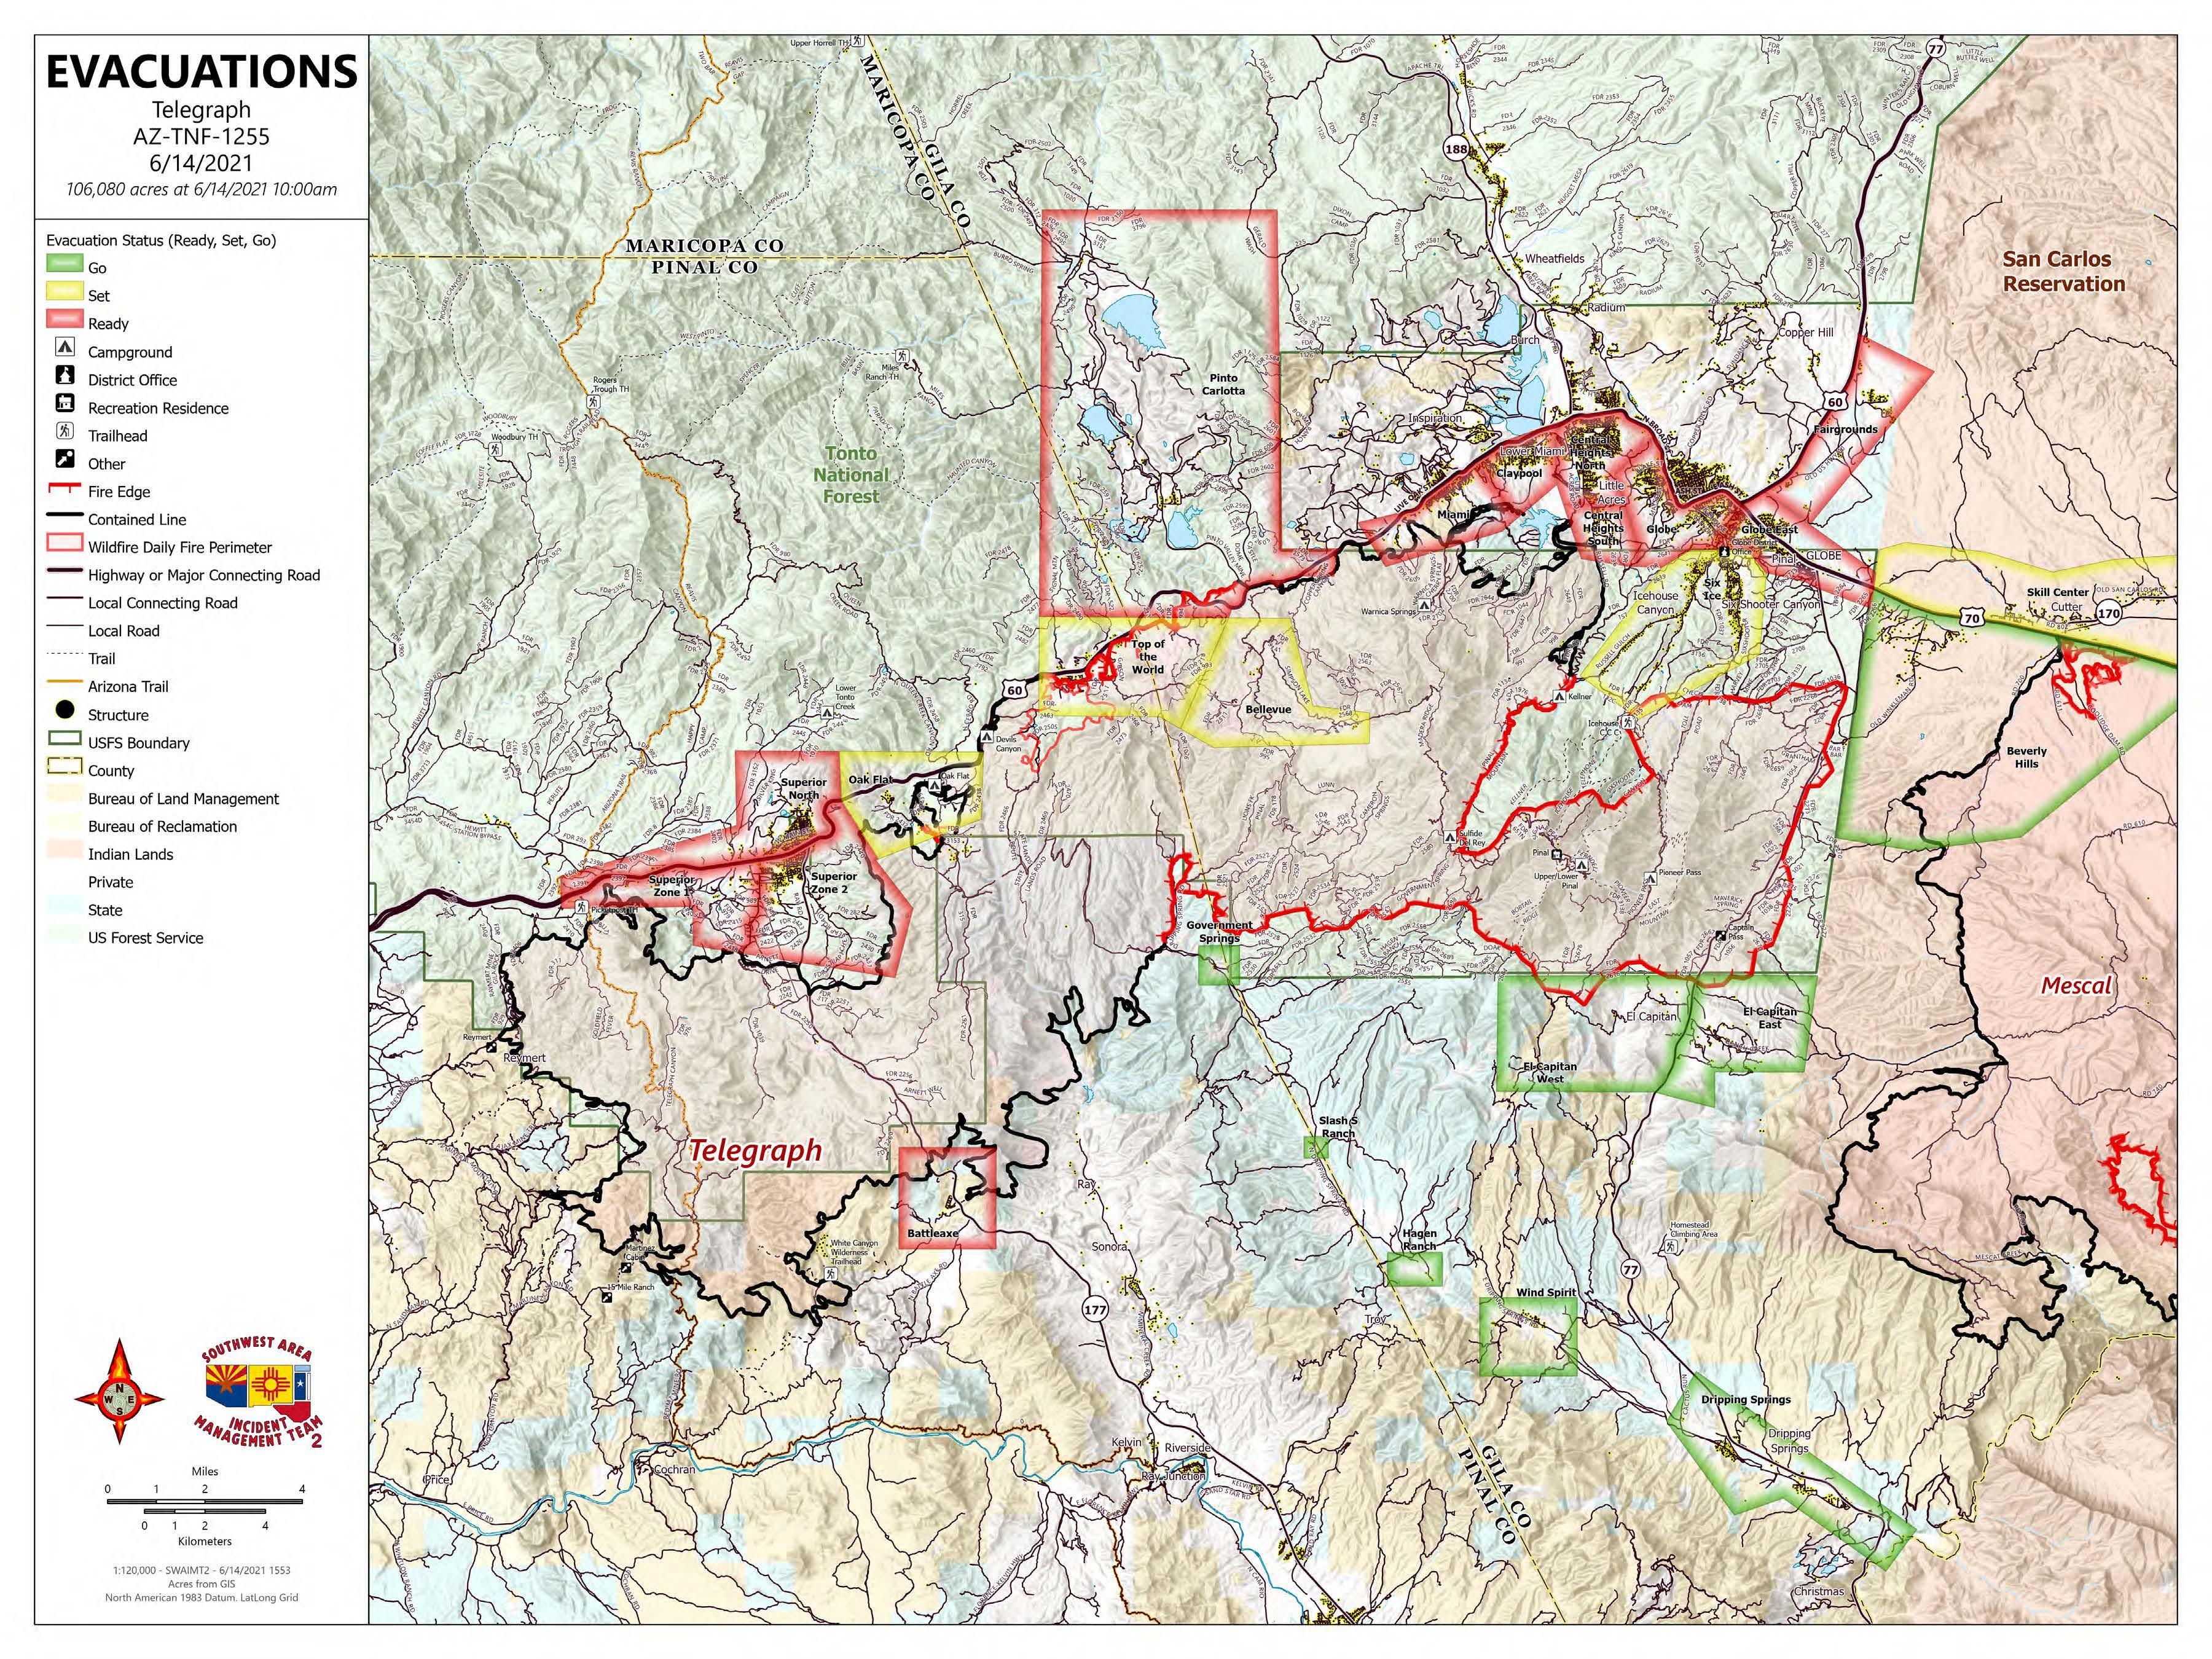 Telegraph Fire map with evacuations labeled